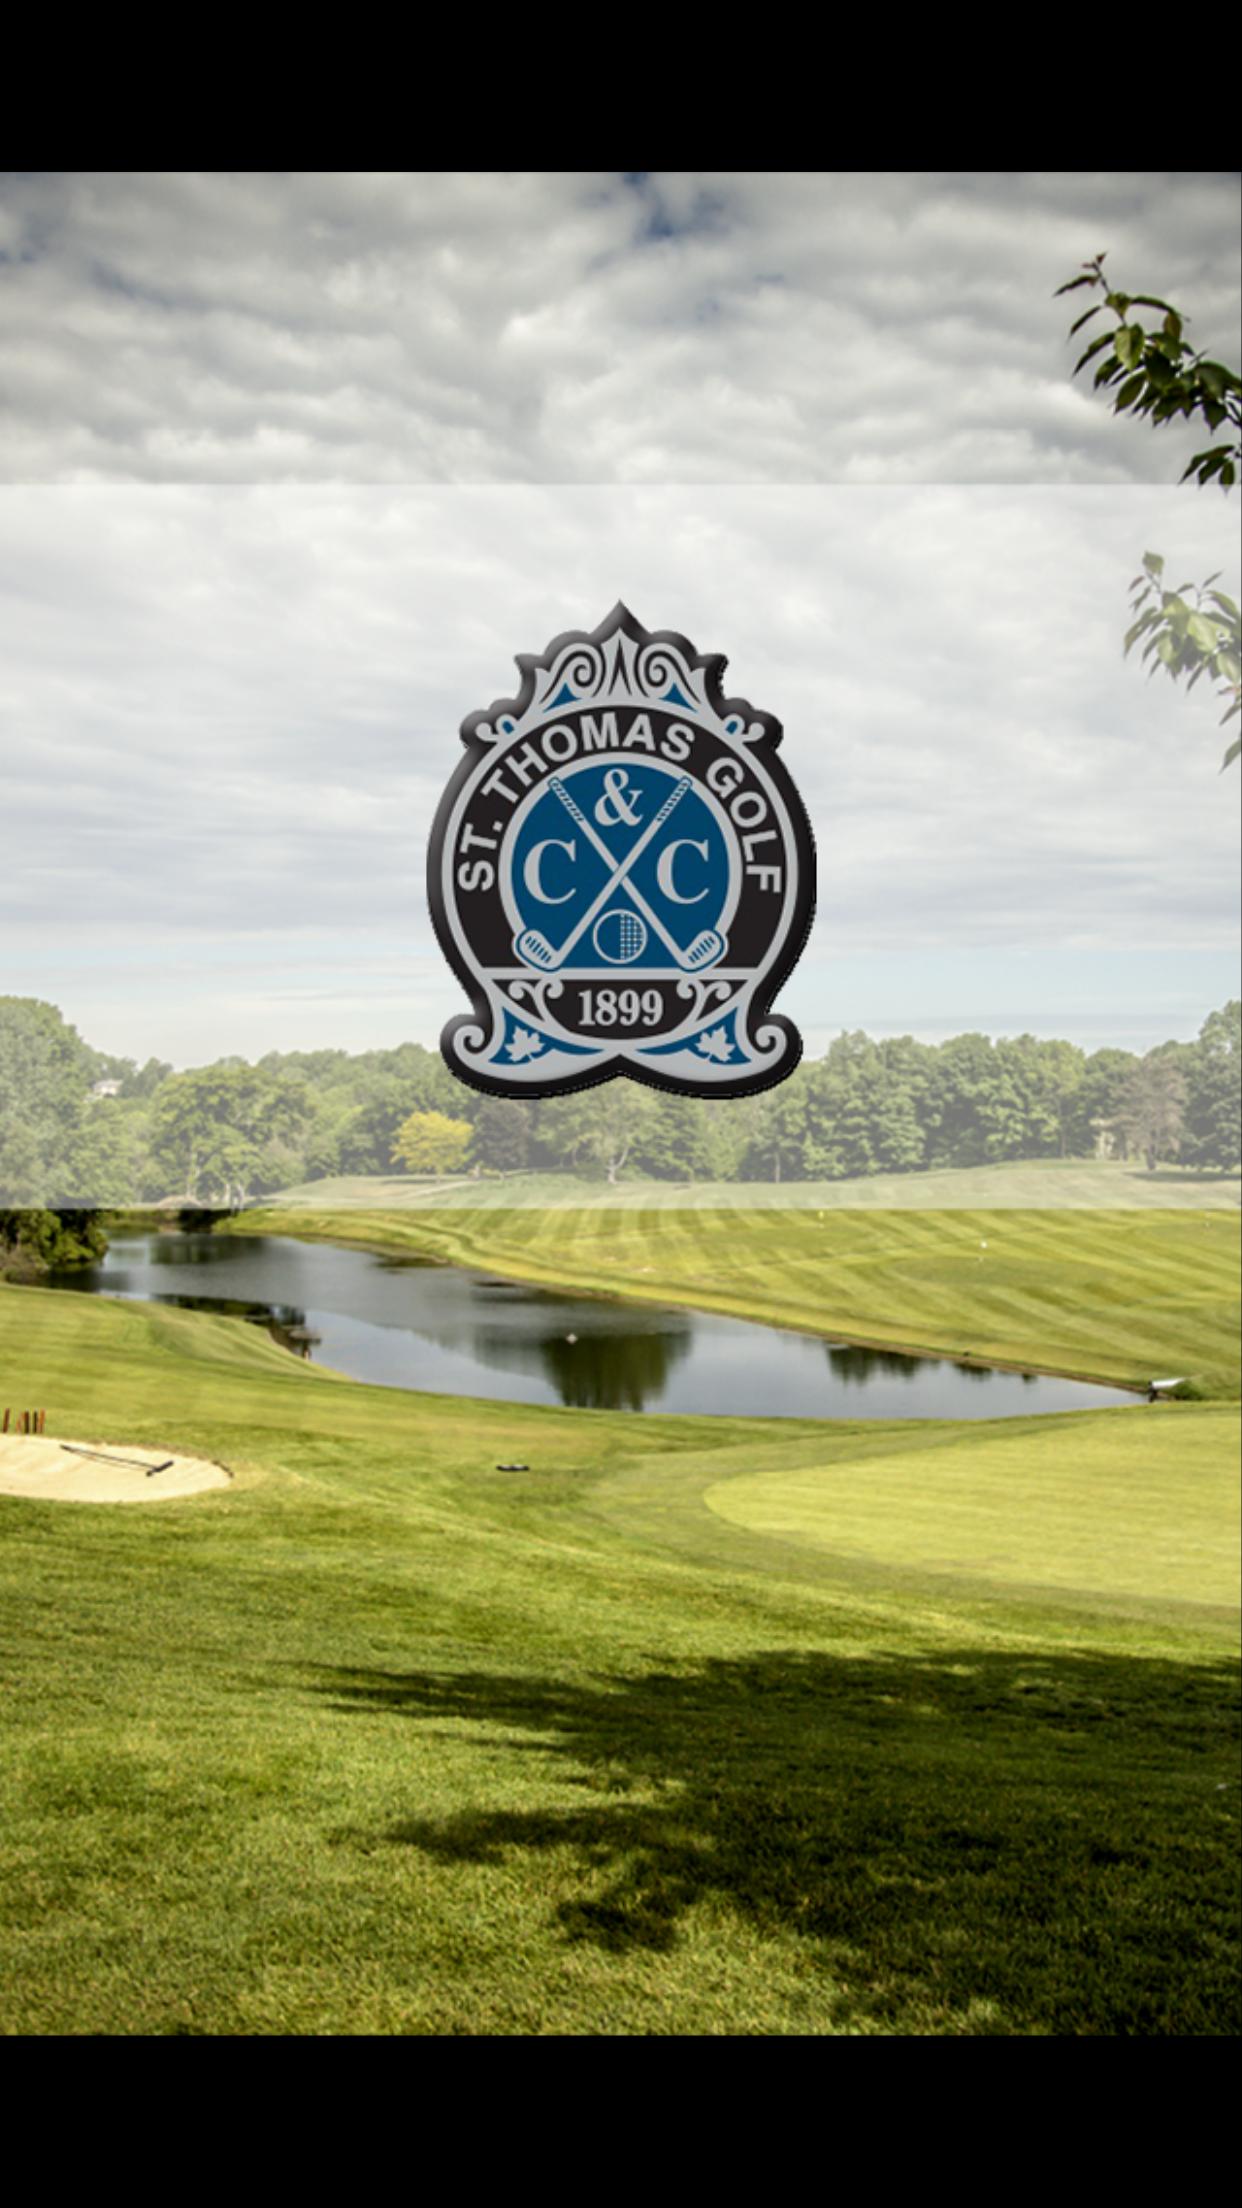 St. Thomas Golf & Country Club for Android - APK Download